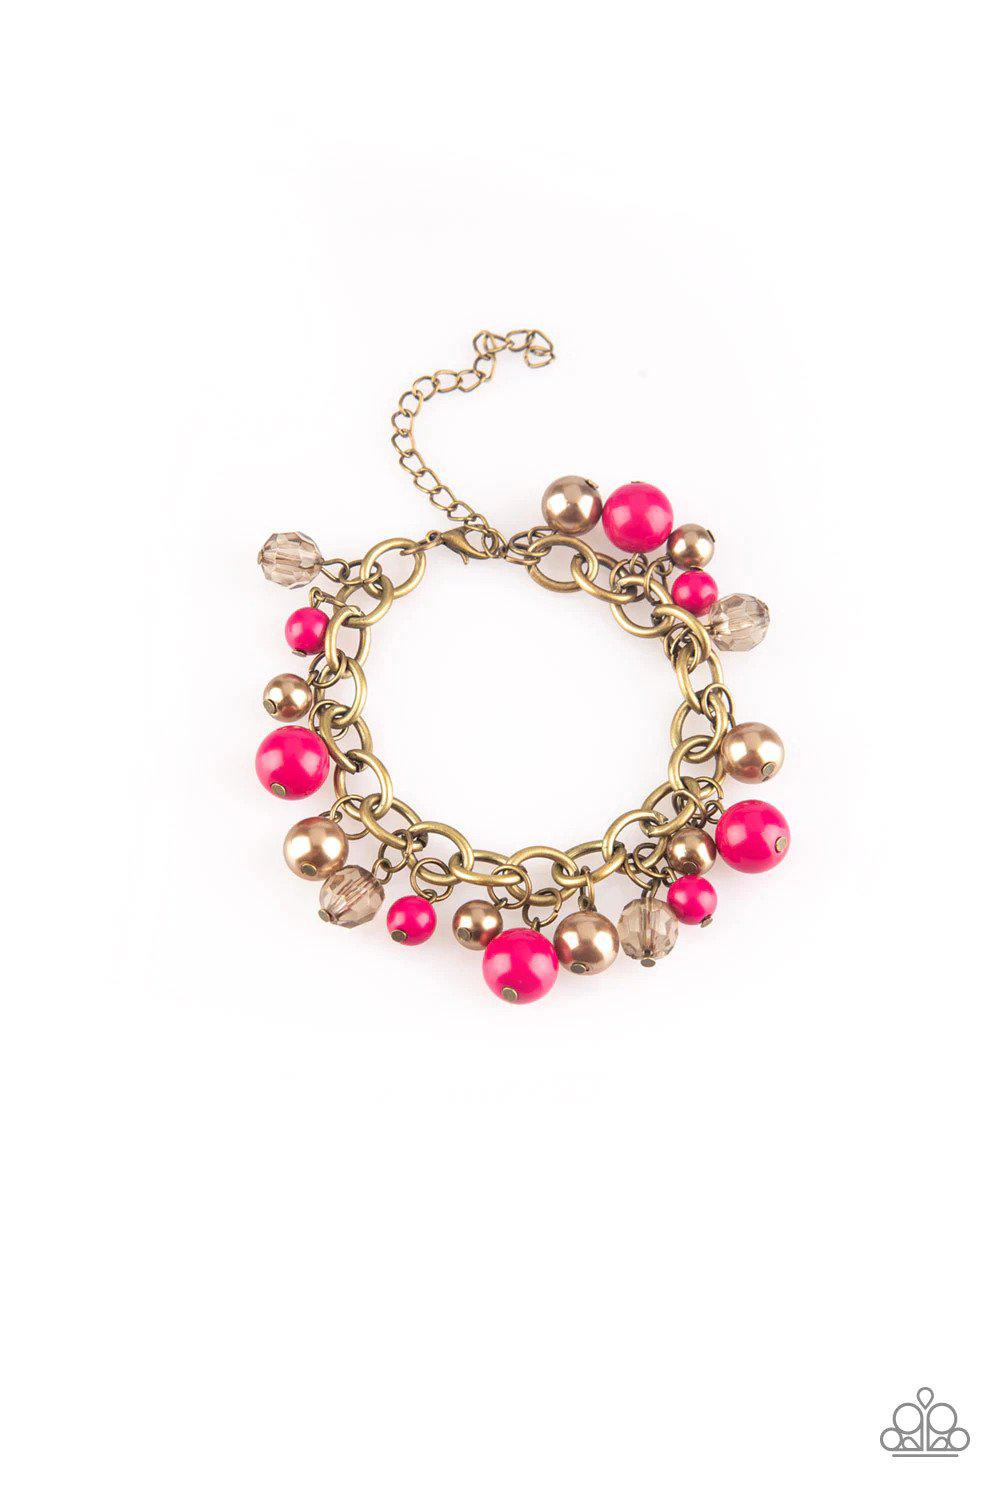 Grit and Glamour Pink and Brass Bracelet - Paparazzi Accessories- lightbox - CarasShop.com - $5 Jewelry by Cara Jewels